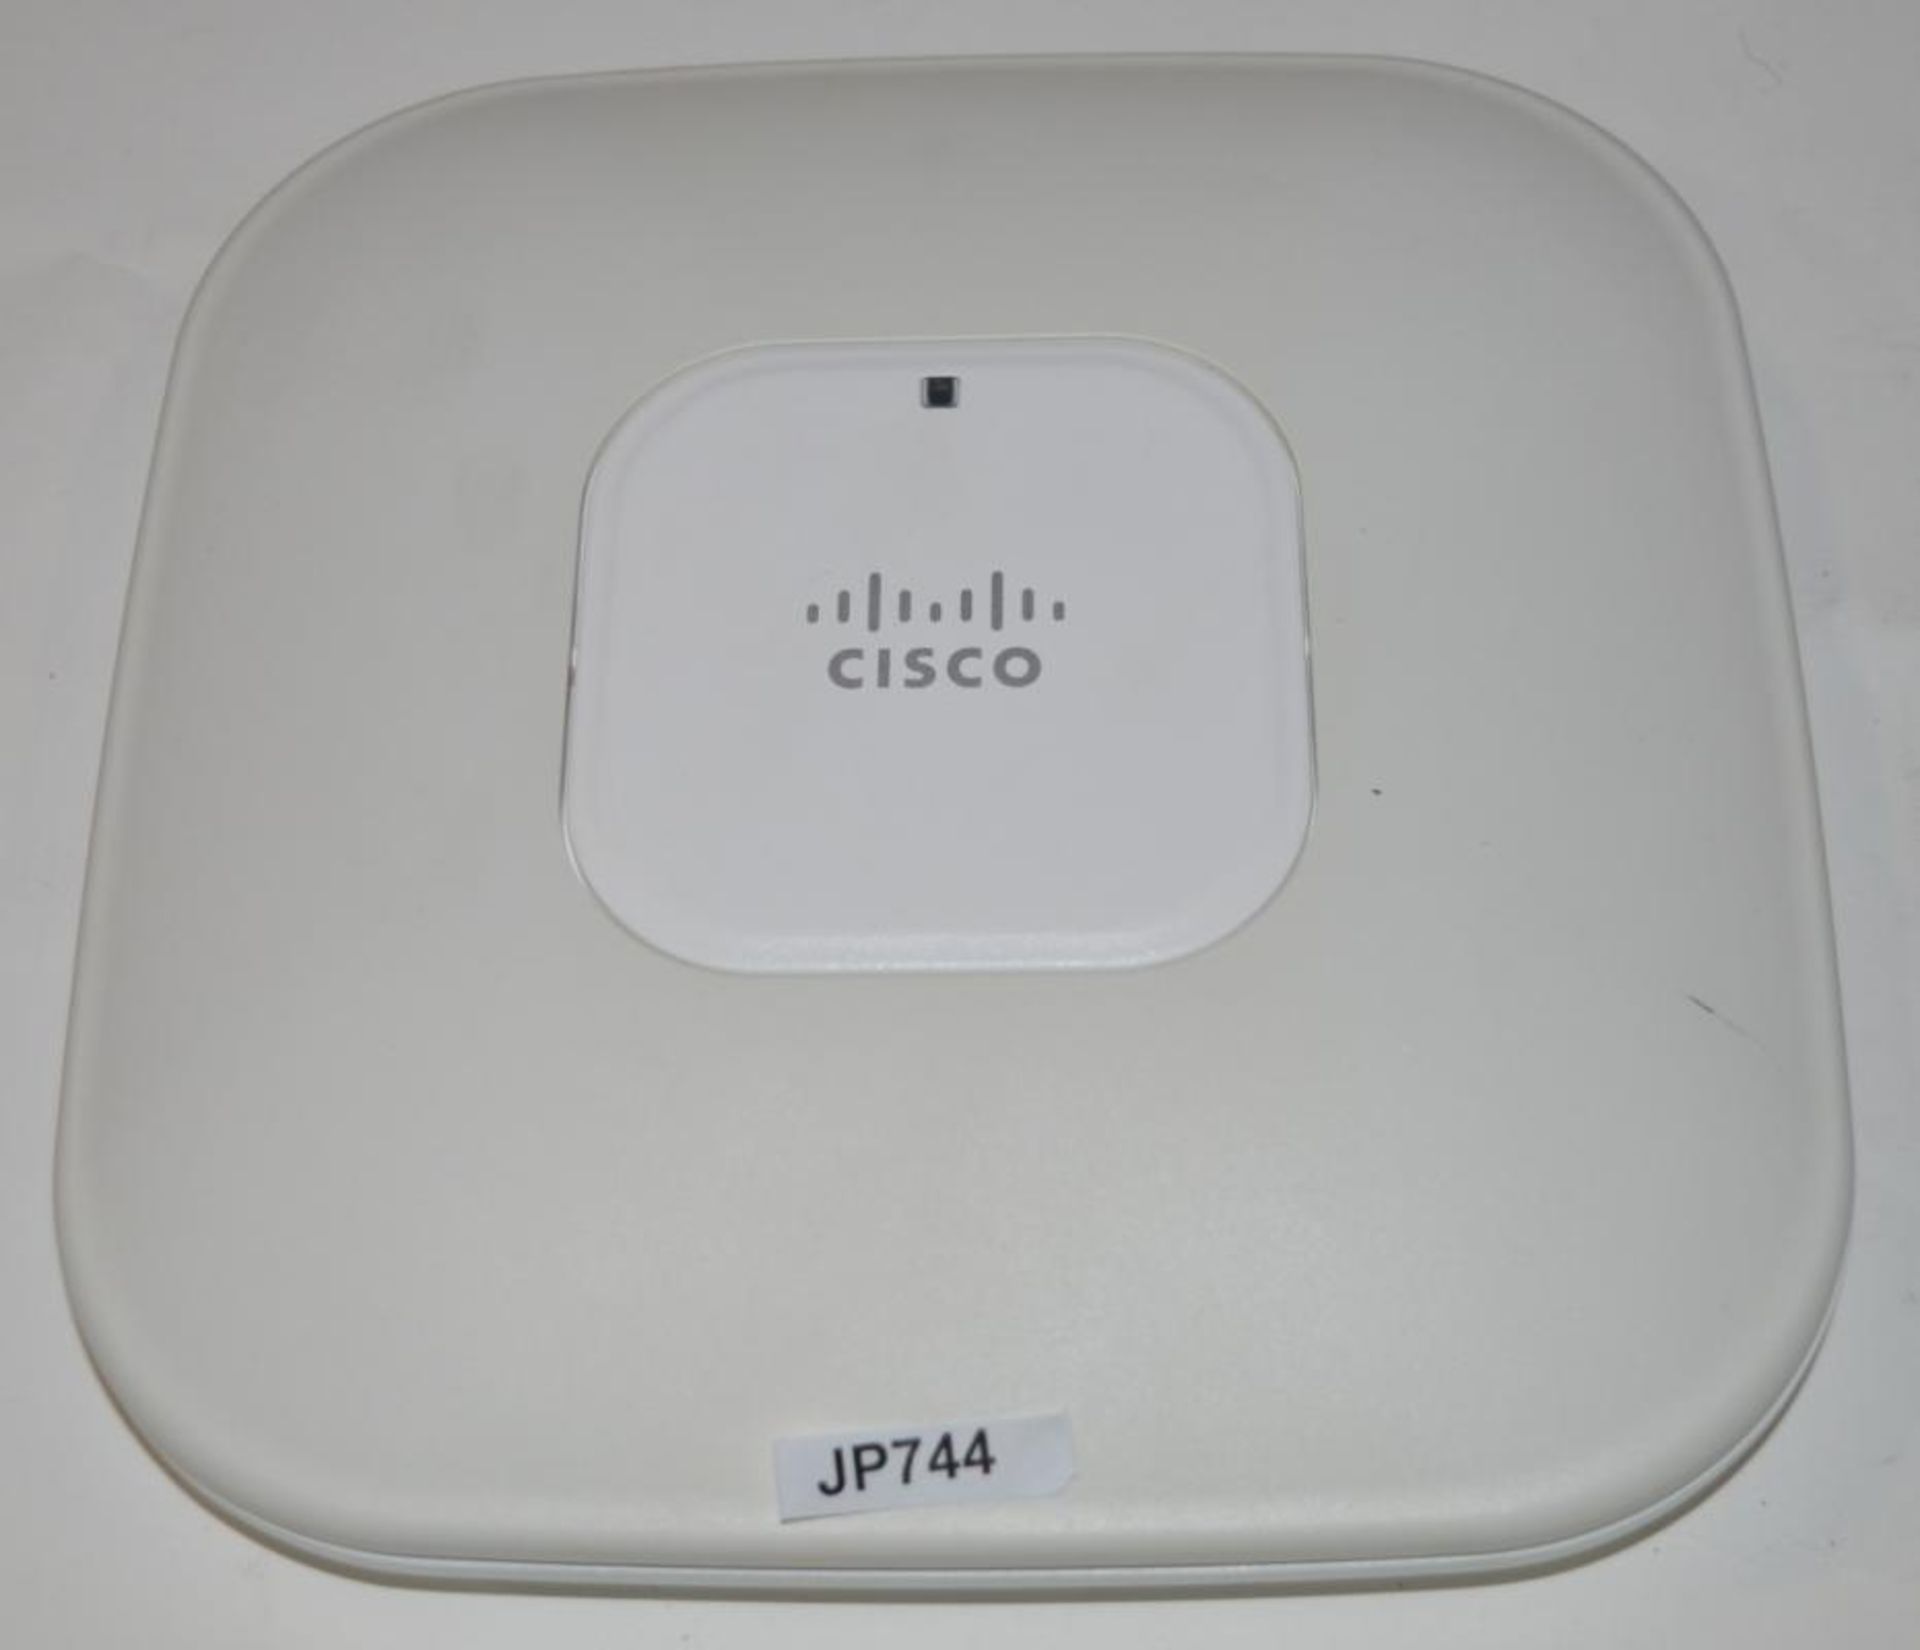 1 x Cisco AIR-LAP1142N-E-K9 Cisco AIR-LAP1142N-E-K9 Controller Based Radio Access Point Router - CL4